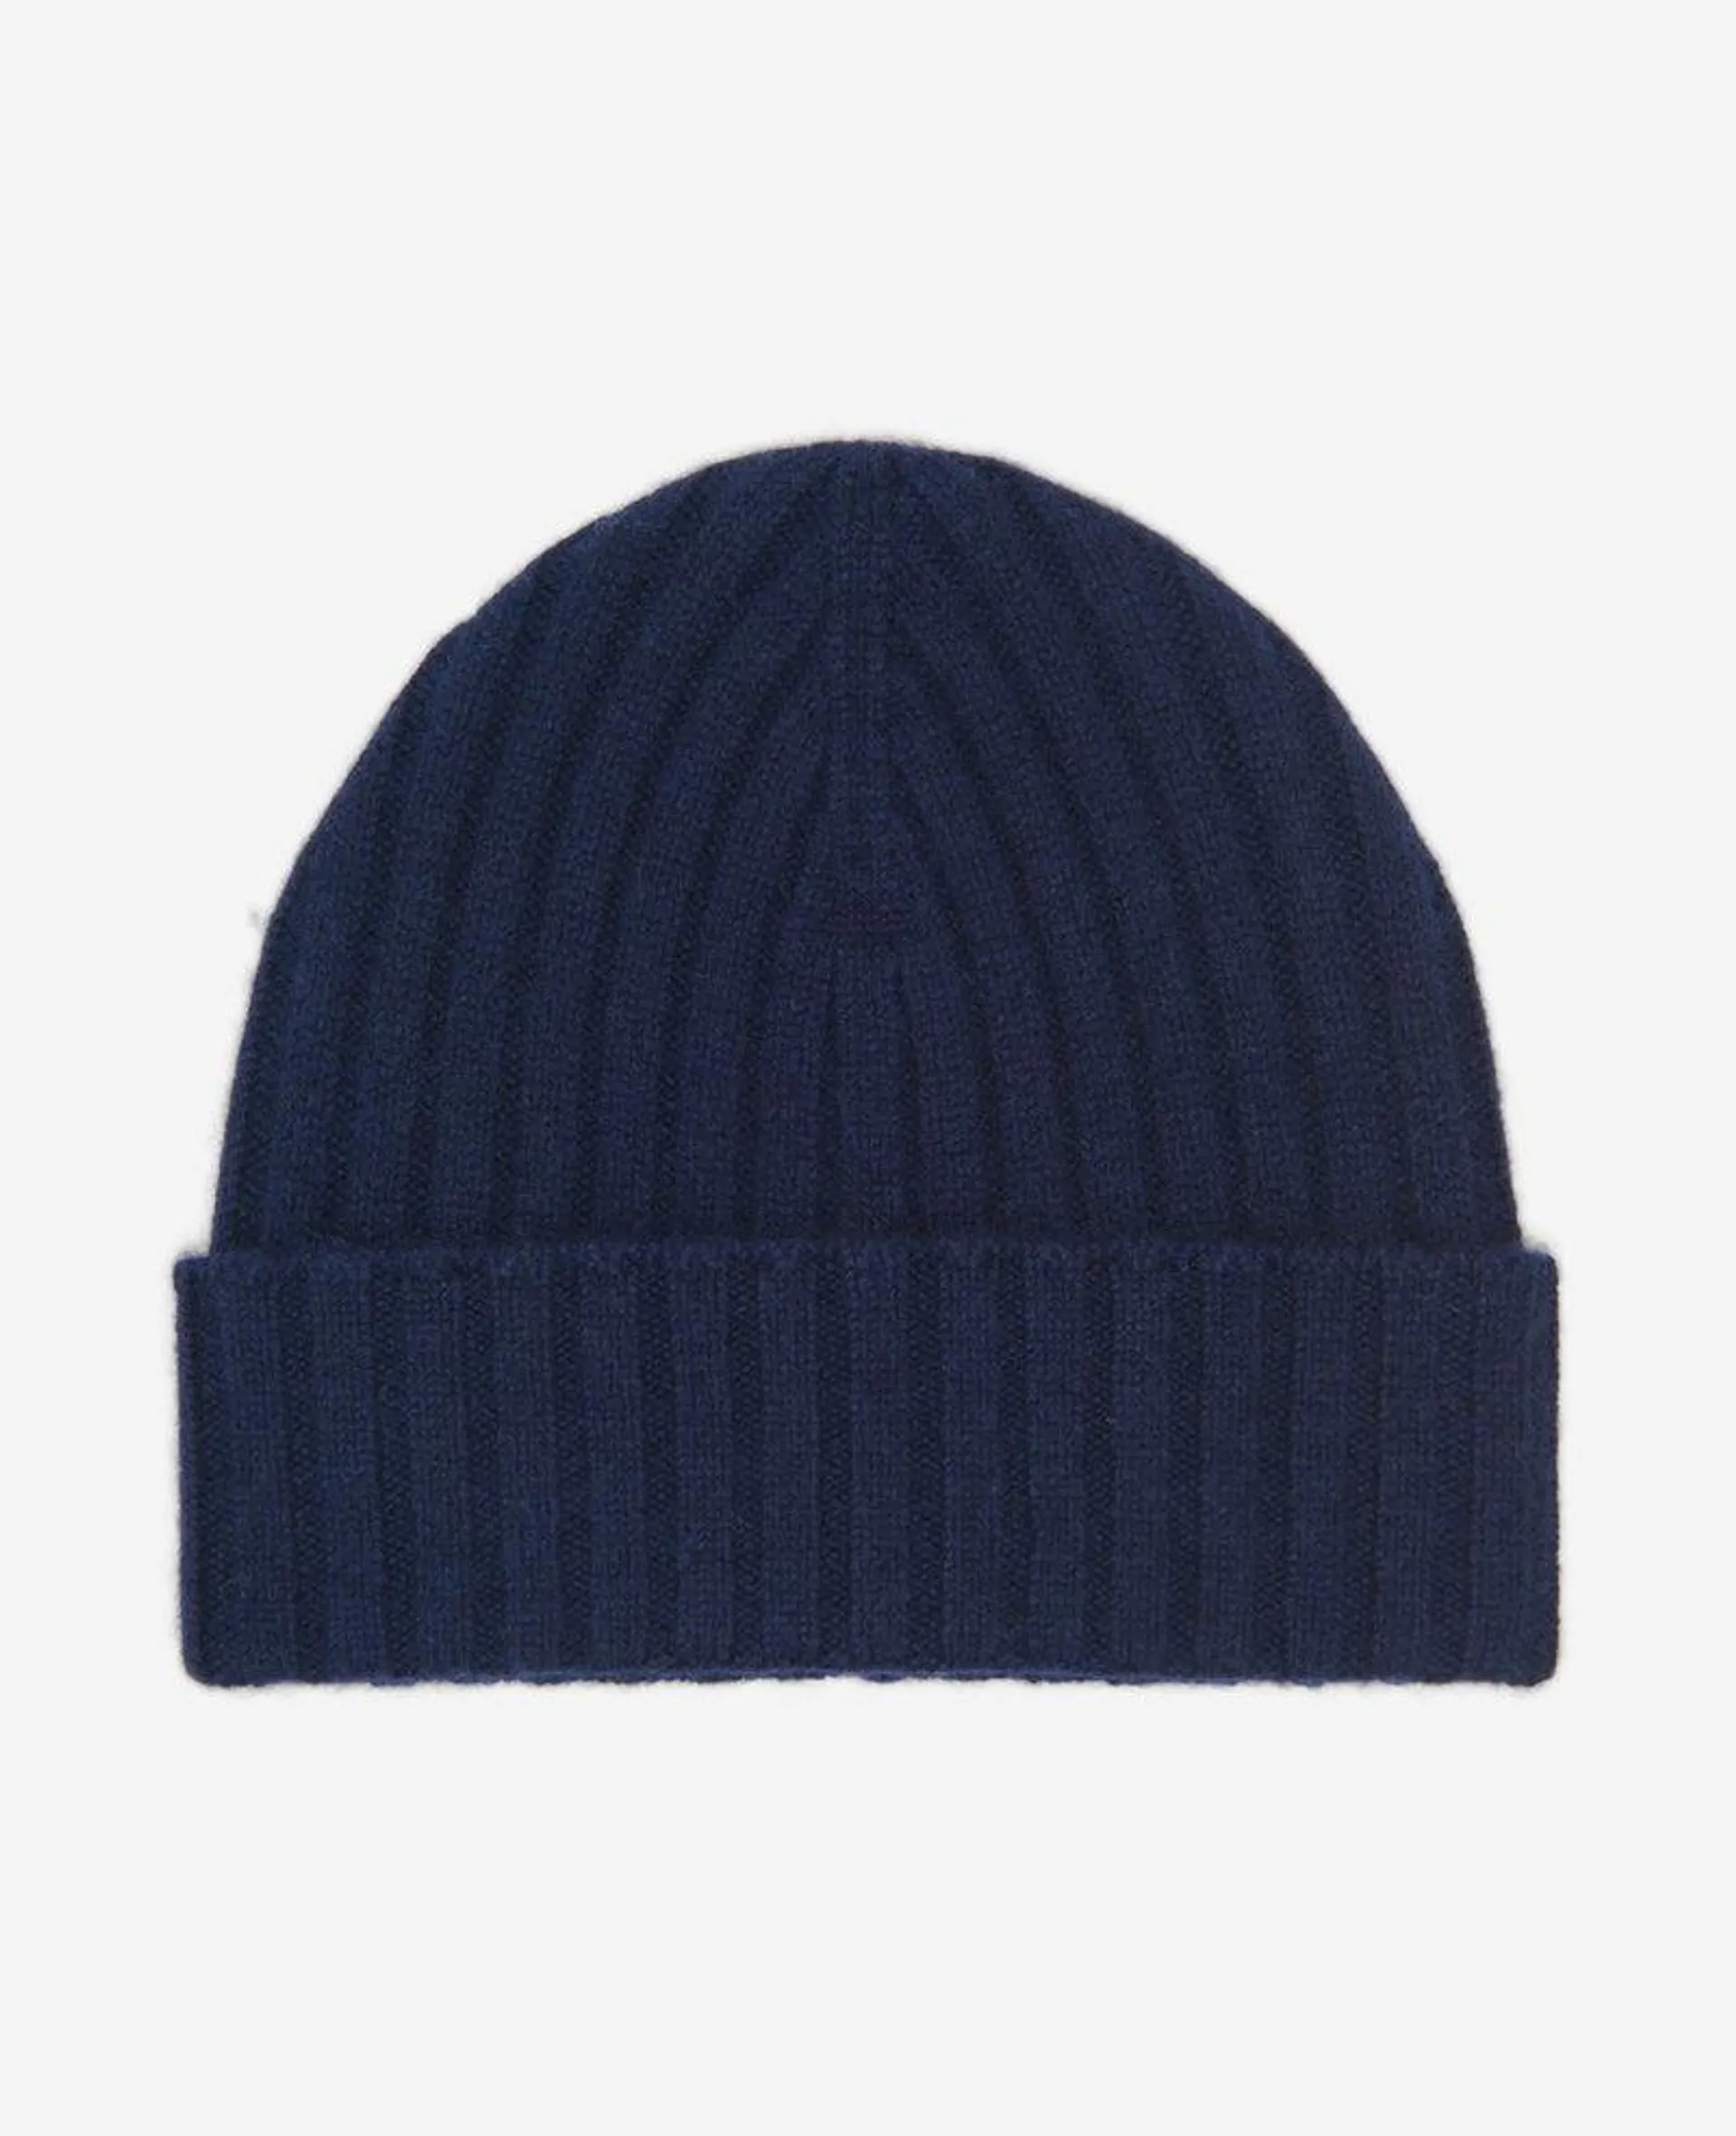 Site Exclusive! Rib Knit Wool Cashmere Beanie